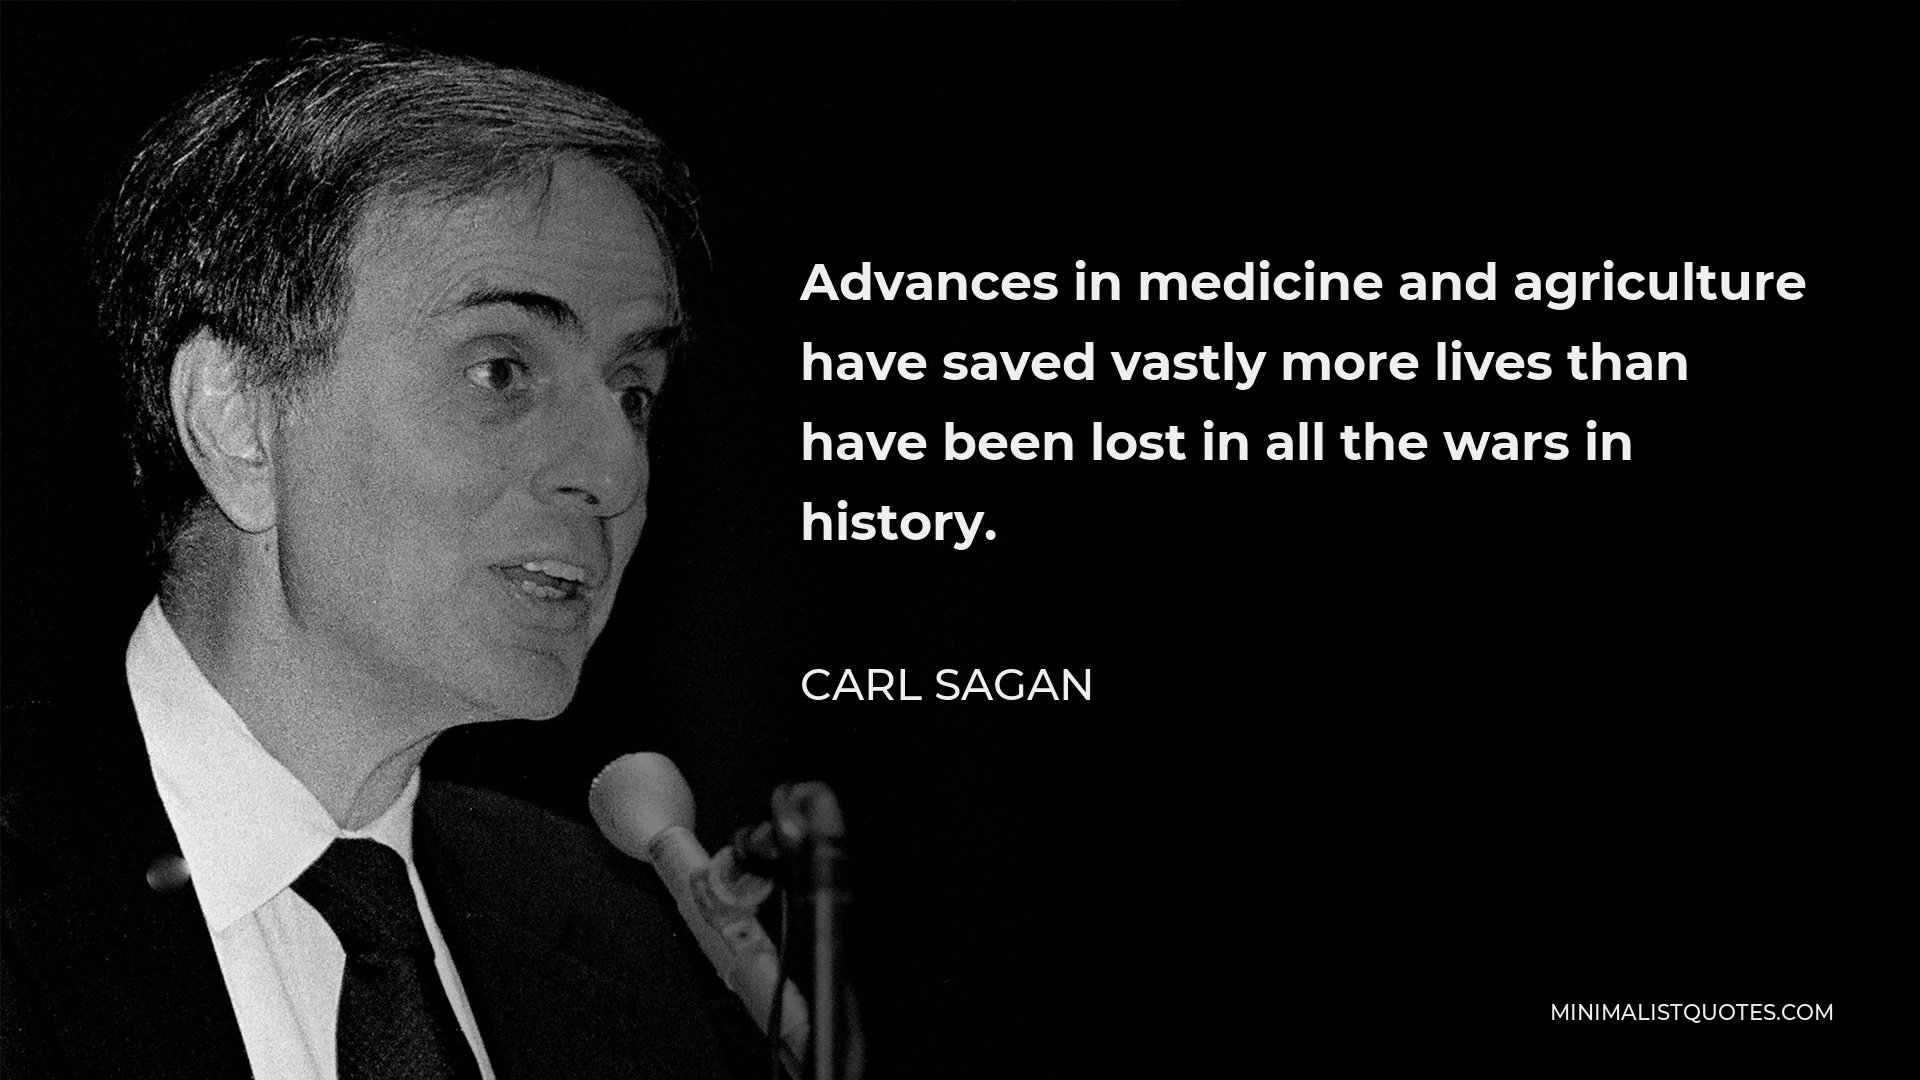 Carl Sagan Quote - Advances in medicine and agriculture have saved vastly more lives than have been lost in all the wars in history.